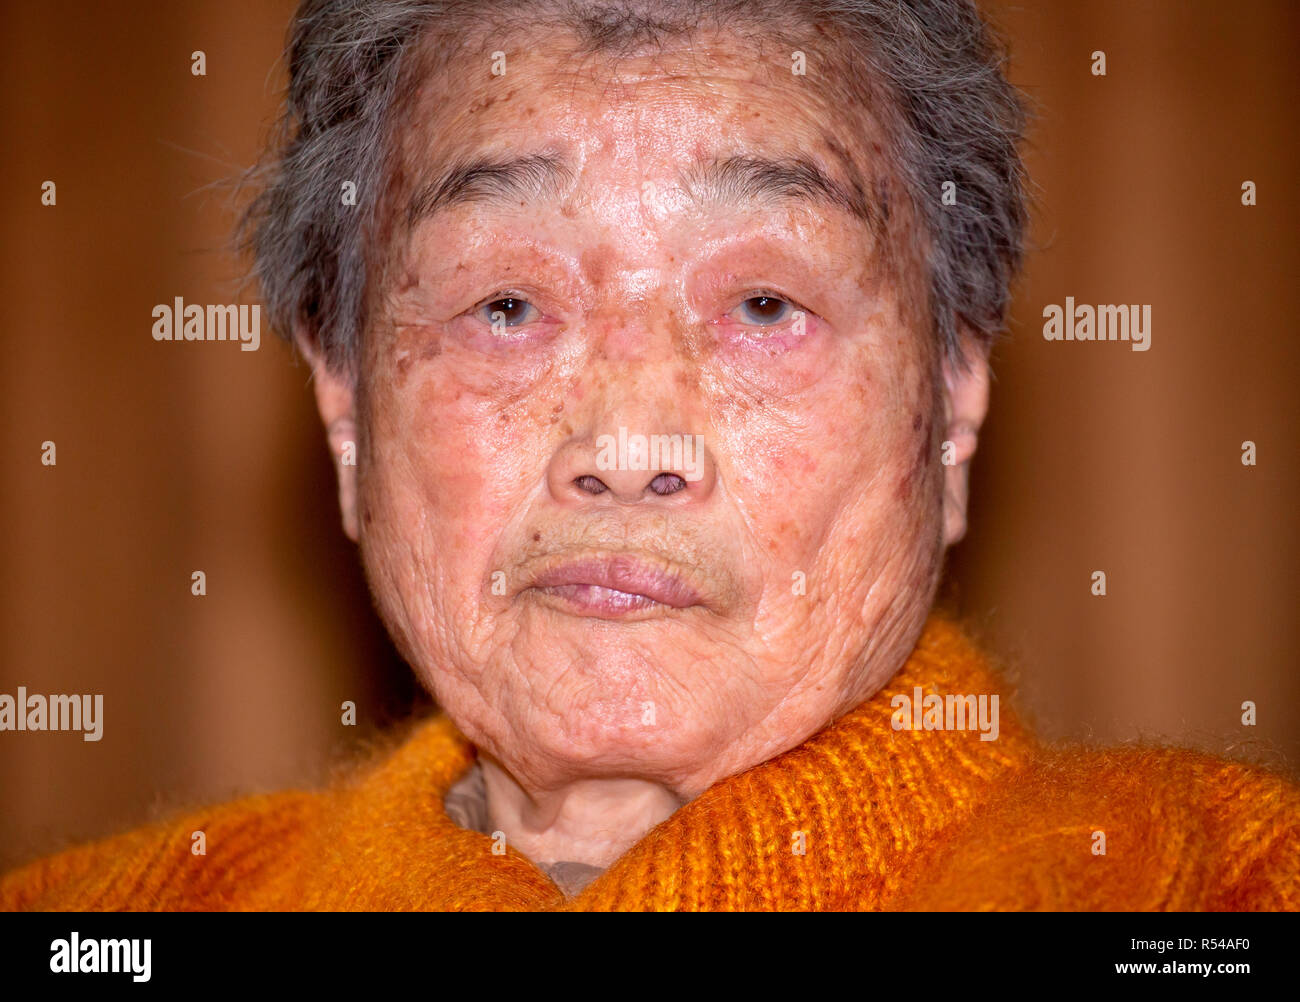 Kim Sung-Joo, Nov 29, 2018 : Kim Sung-Joo, a victim of Japan's forced labor during World War II attends a press conference at the Seoul Bar Association near the Supreme Court in Seoul, South Korea after the Supreme Court's ruling on damages suits. According to local media, South Korea's Supreme Court ordered Mitsubishi Heavy Industries to compensate 10 Koreans who worked at its shipyard and other production facilities in Hiroshima and Nagoya in 1944 with no pay and a bereaved family member of another on two separate damages suits. The top court upheld two appellate court judgments -- one that Stock Photo